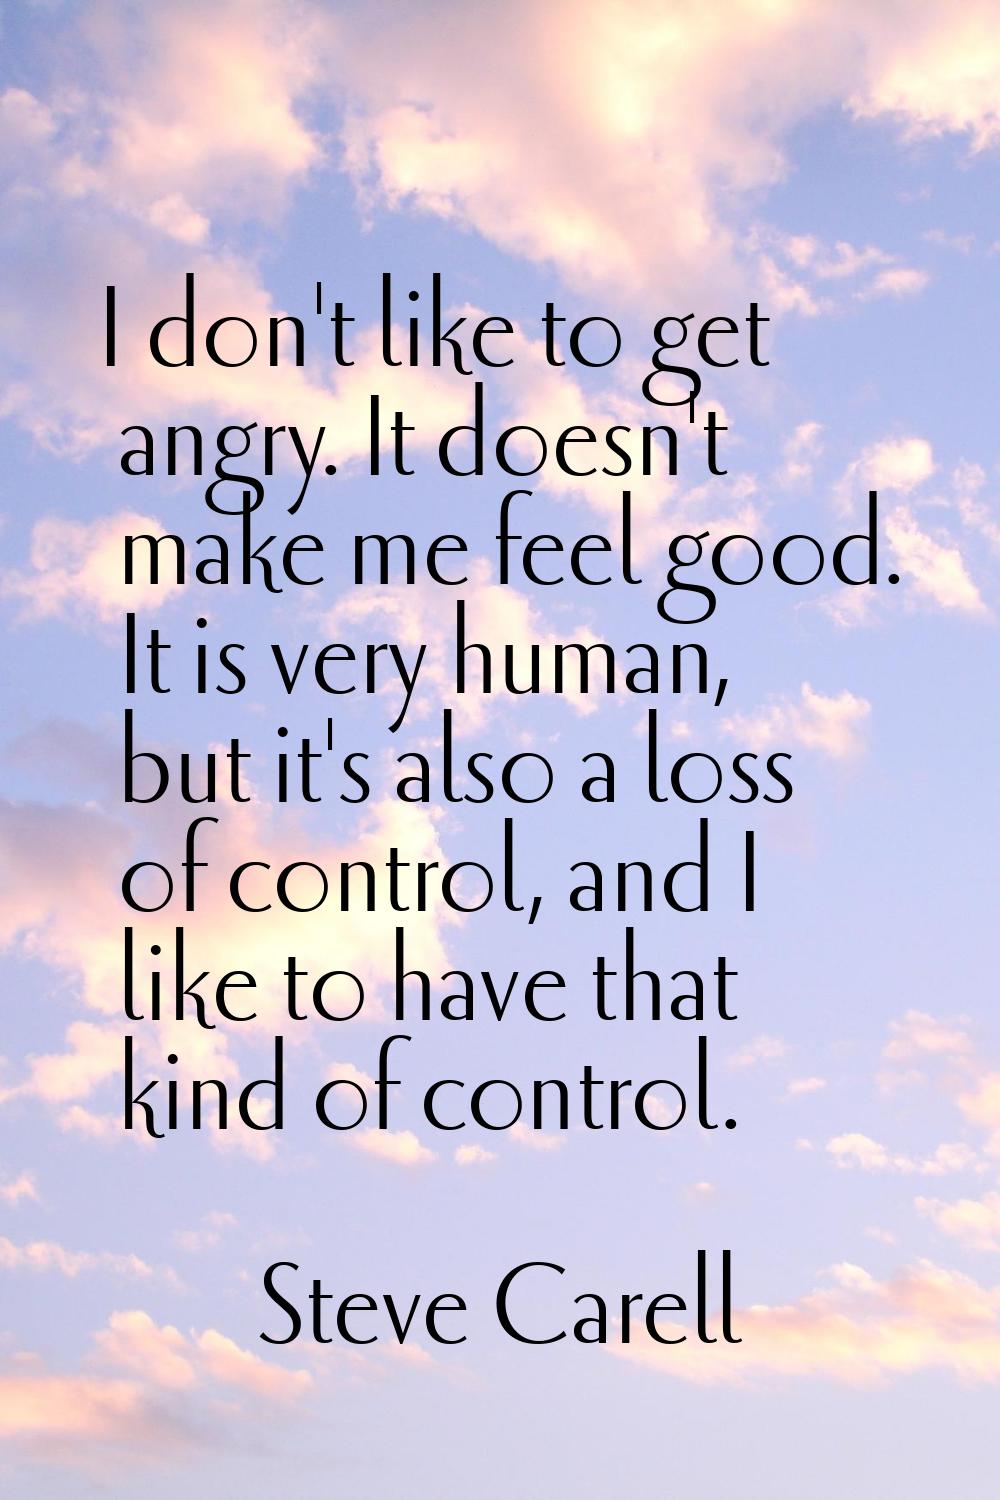 I don't like to get angry. It doesn't make me feel good. It is very human, but it's also a loss of 